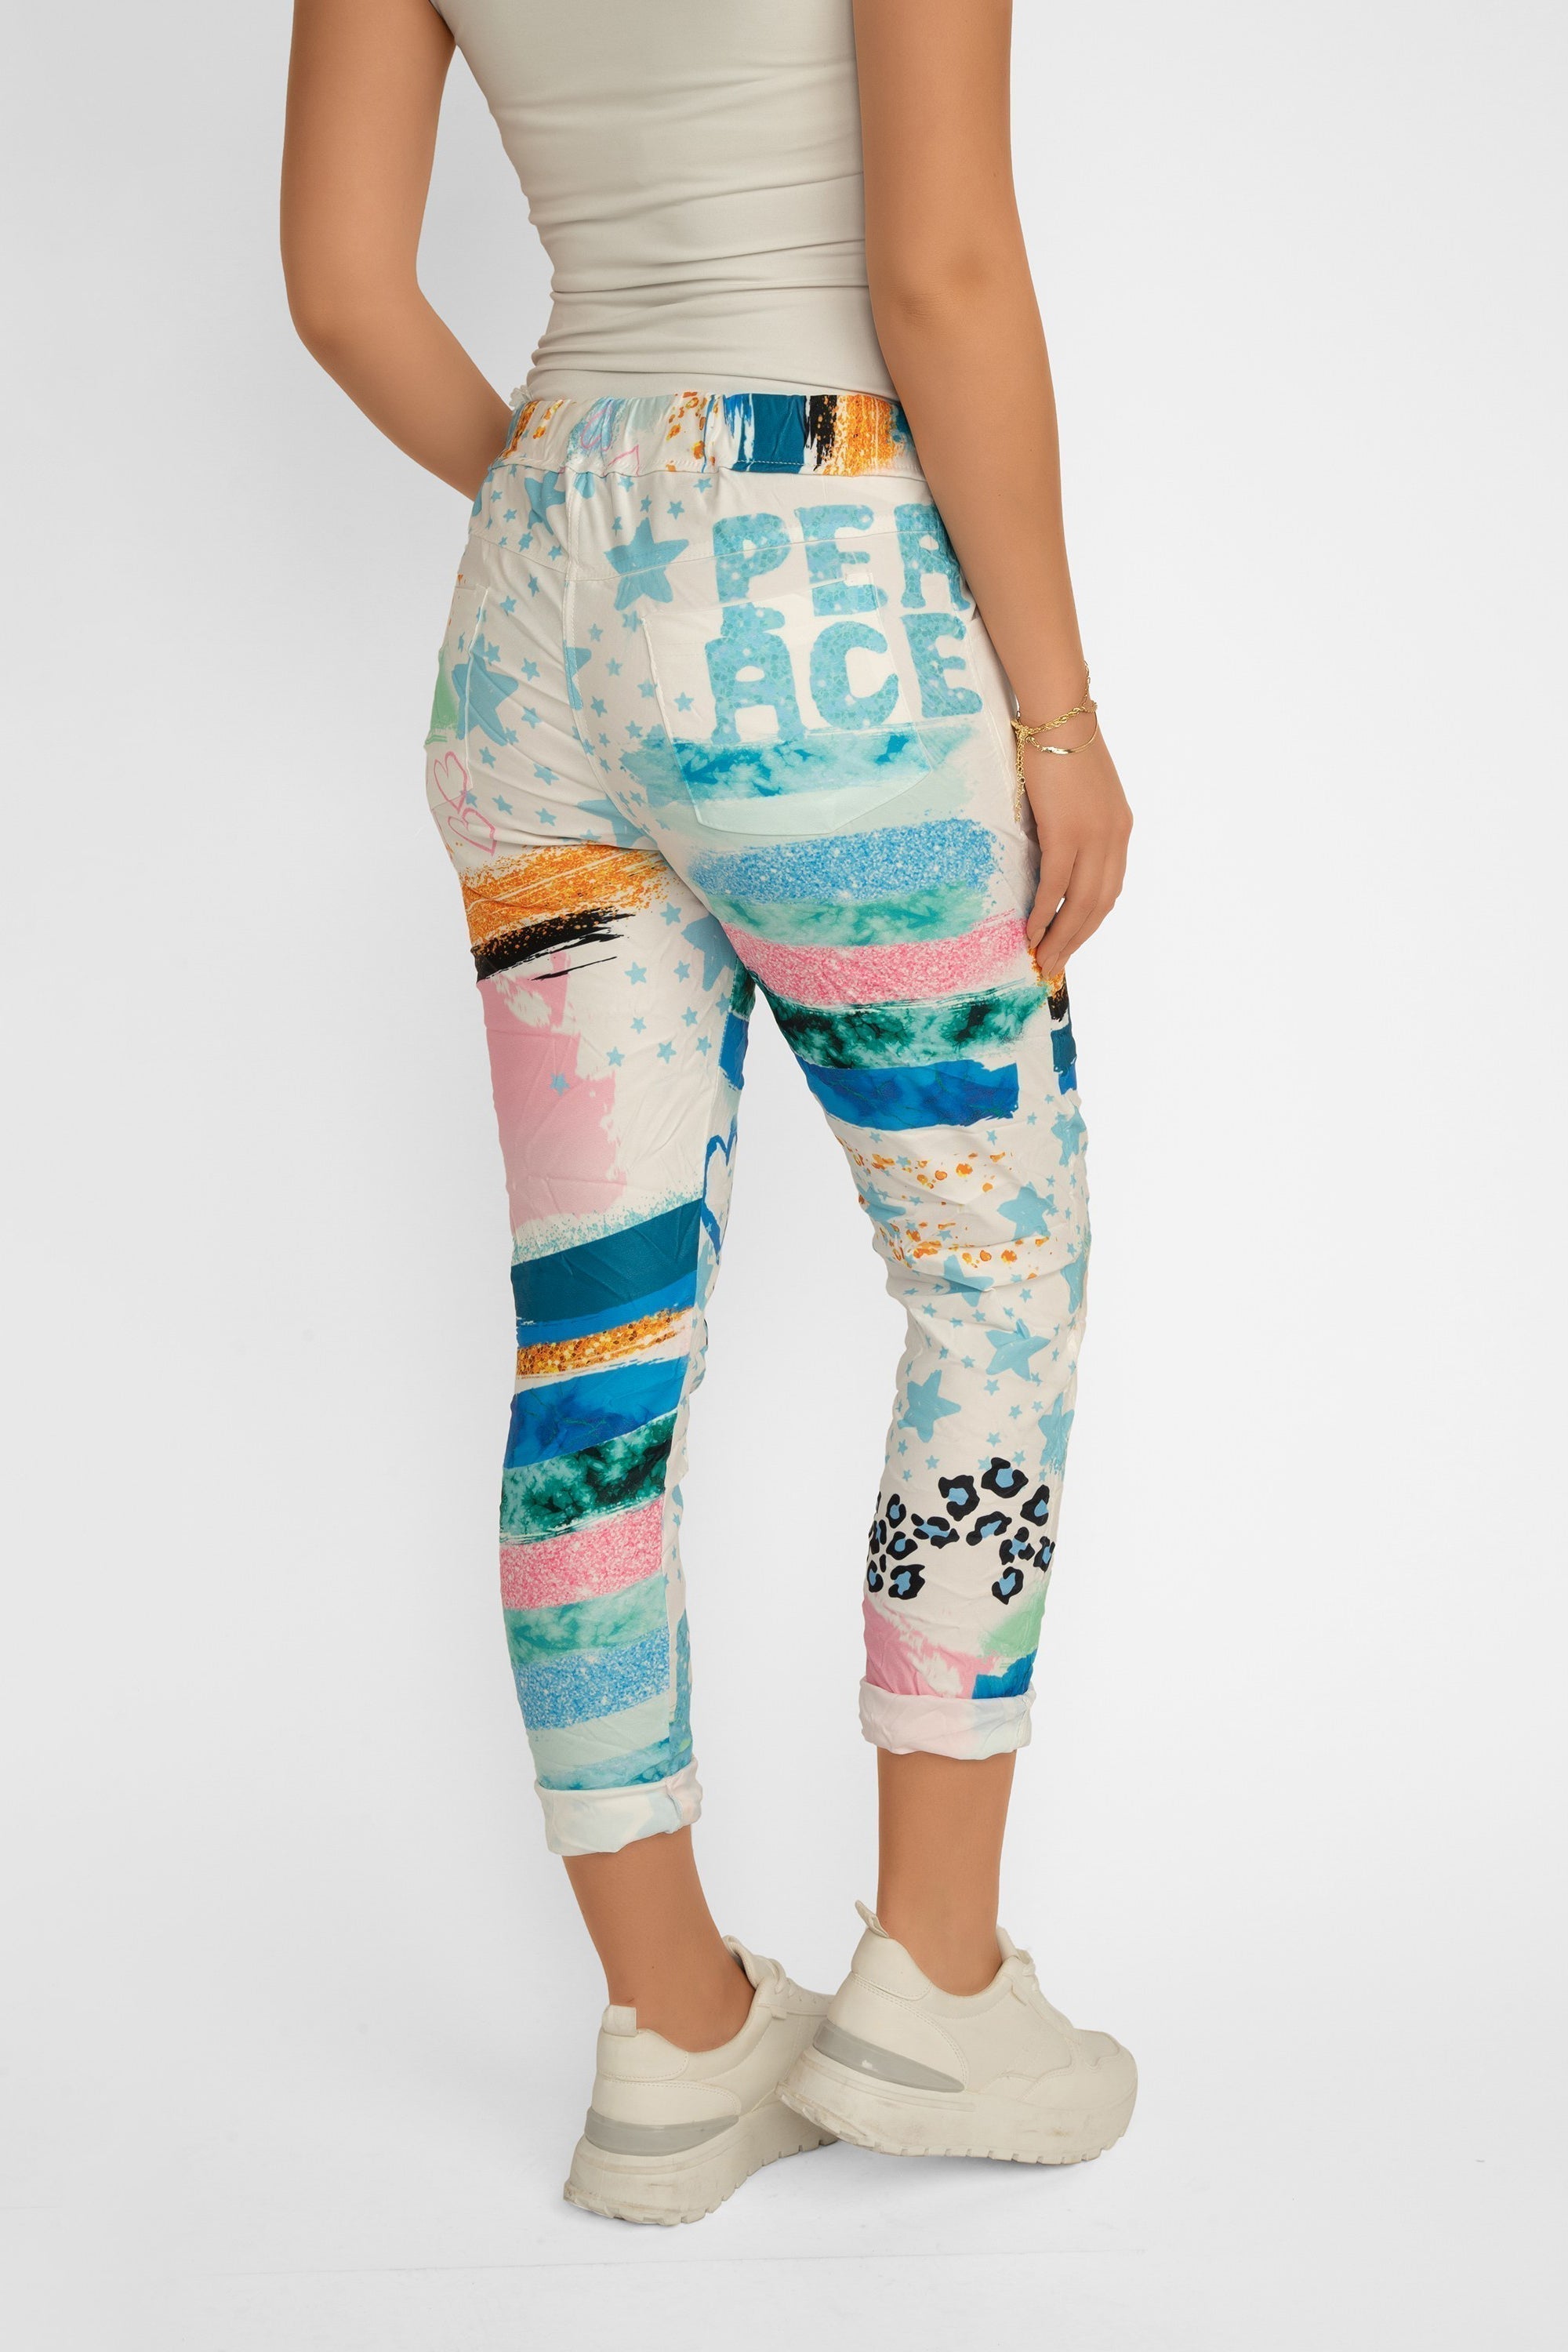 Back view of Bella Amore Women's Cropped Multi Print Pull-On Pants in a Blue and multi-coloured patchwork print